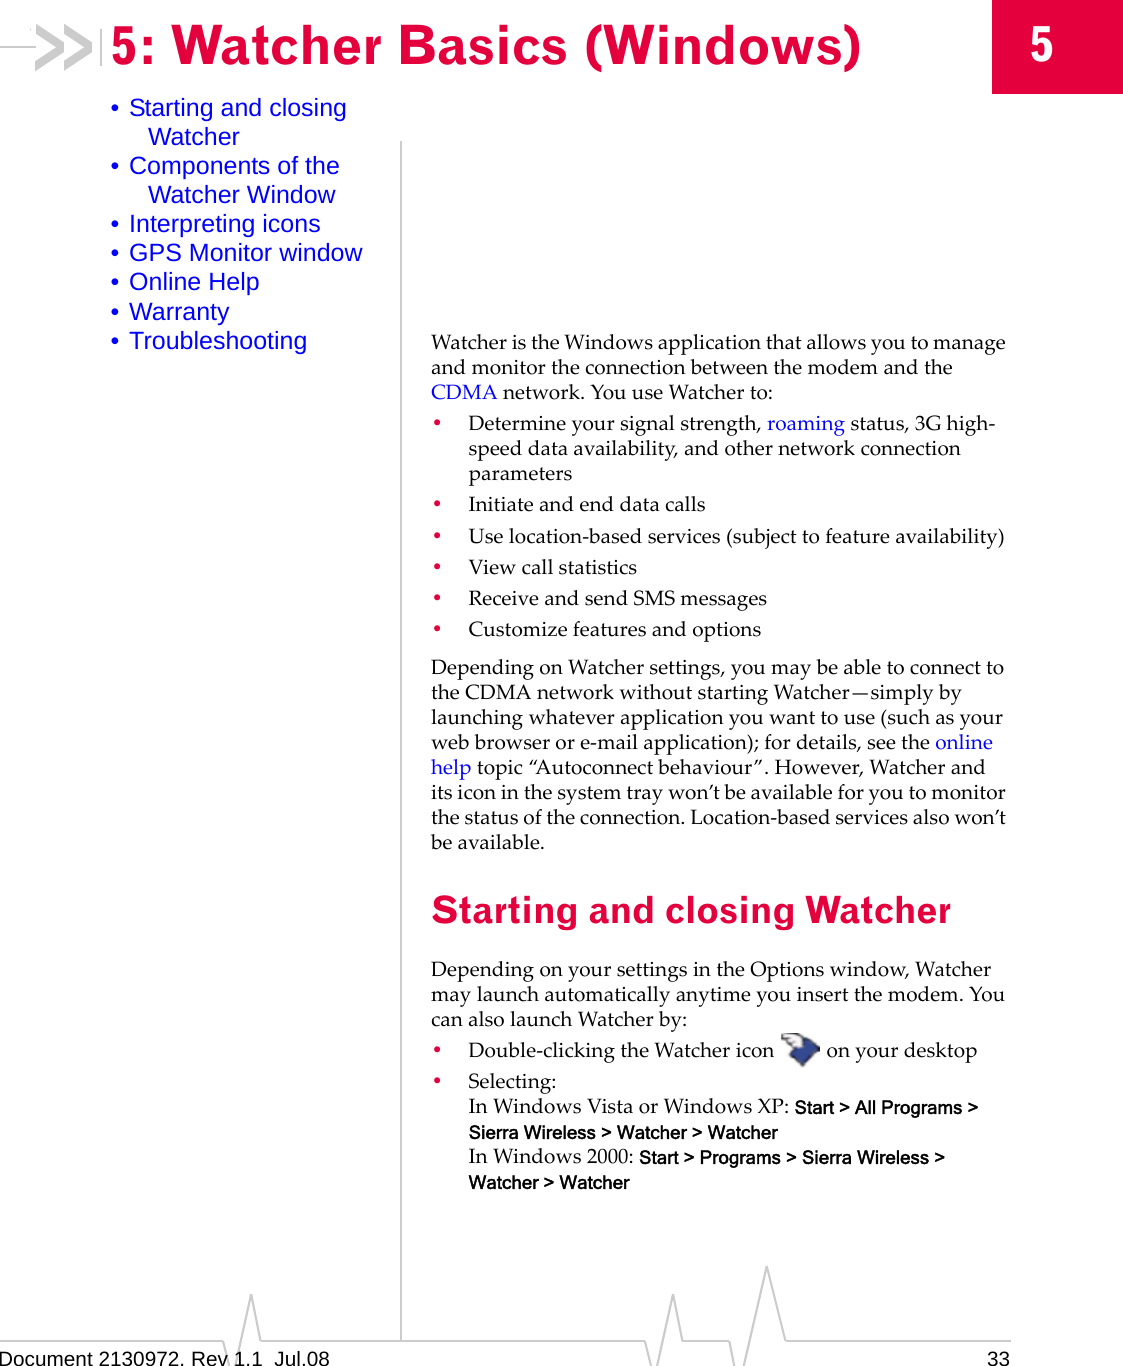 Document 2130972. Rev 1.1  Jul.08 3355: Watcher Basics (Windows)• Starting and closing Watcher• Components of the Watcher Window• Interpreting icons• GPS Monitor window• Online Help• Warranty• Troubleshooting WatcheristheWindowsapplicationthatallowsyoutomanageandmonitortheconnectionbetweenthemodemandtheCDMAnetwork.YouuseWatcherto:•Determineyoursignalstrength,roamingstatus,3Ghigh‐speeddataavailability,andothernetworkconnectionparameters•Initiateandenddatacalls•Uselocation‐basedservices(subjecttofeatureavailability)•Viewcallstatistics•ReceiveandsendSMSmessages•CustomizefeaturesandoptionsDependingonWatchersettings,youmaybeabletoconnecttotheCDMAnetworkwithoutstartingWatcher—simplybylaunchingwhateverapplicationyouwanttouse(suchasyourwebbrowserore‐mailapplication);fordetails,seetheonlinehelptopic“Autoconnectbehaviour”.However,Watcheranditsiconinthesystemtraywon’tbeavailableforyoutomonitorthestatusoftheconnection.Location‐basedservicesalsowon’tbeavailable.Starting and closing WatcherDependingonyoursettingsintheOptionswindow,Watchermaylaunchautomaticallyanytimeyouinsertthemodem.YoucanalsolaunchWatcherby:•Double‐clickingtheWatchericon onyourdesktop•Selecting:InWindowsVistaorWindowsXP:Start &gt; All Programs &gt; Sierra Wireless &gt; Watcher &gt; WatcherInWindows2000:Start &gt; Programs &gt; Sierra Wireless &gt; Watcher &gt; Watcher